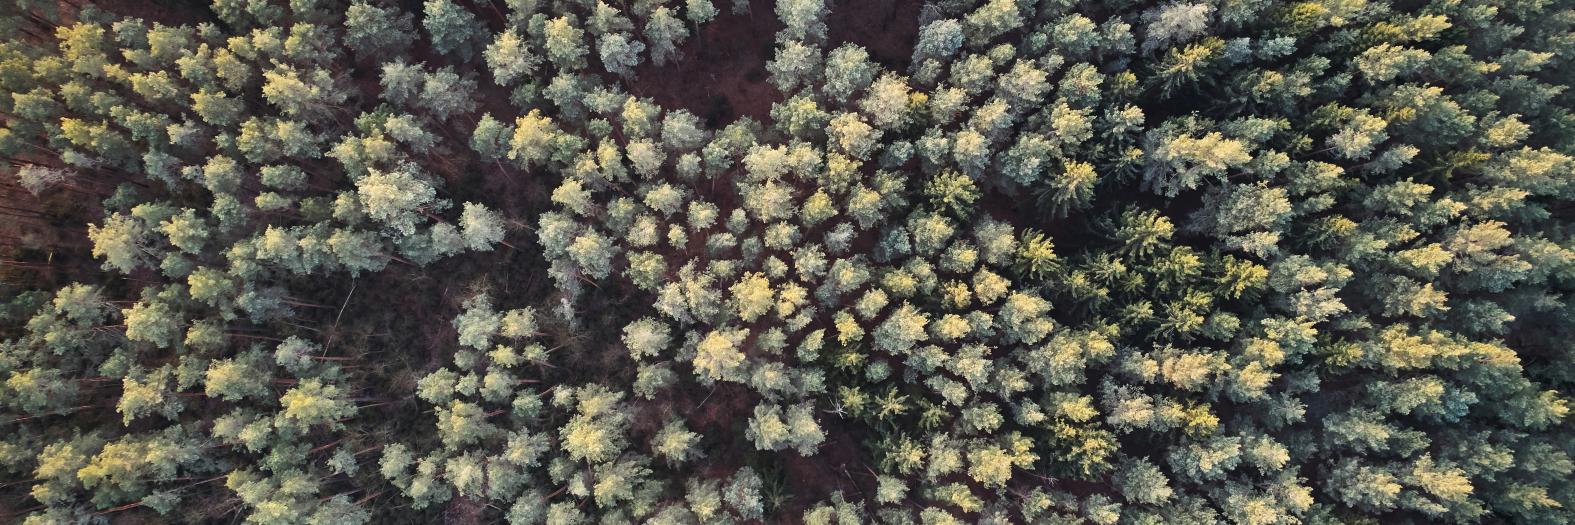 Overhead image of a forest